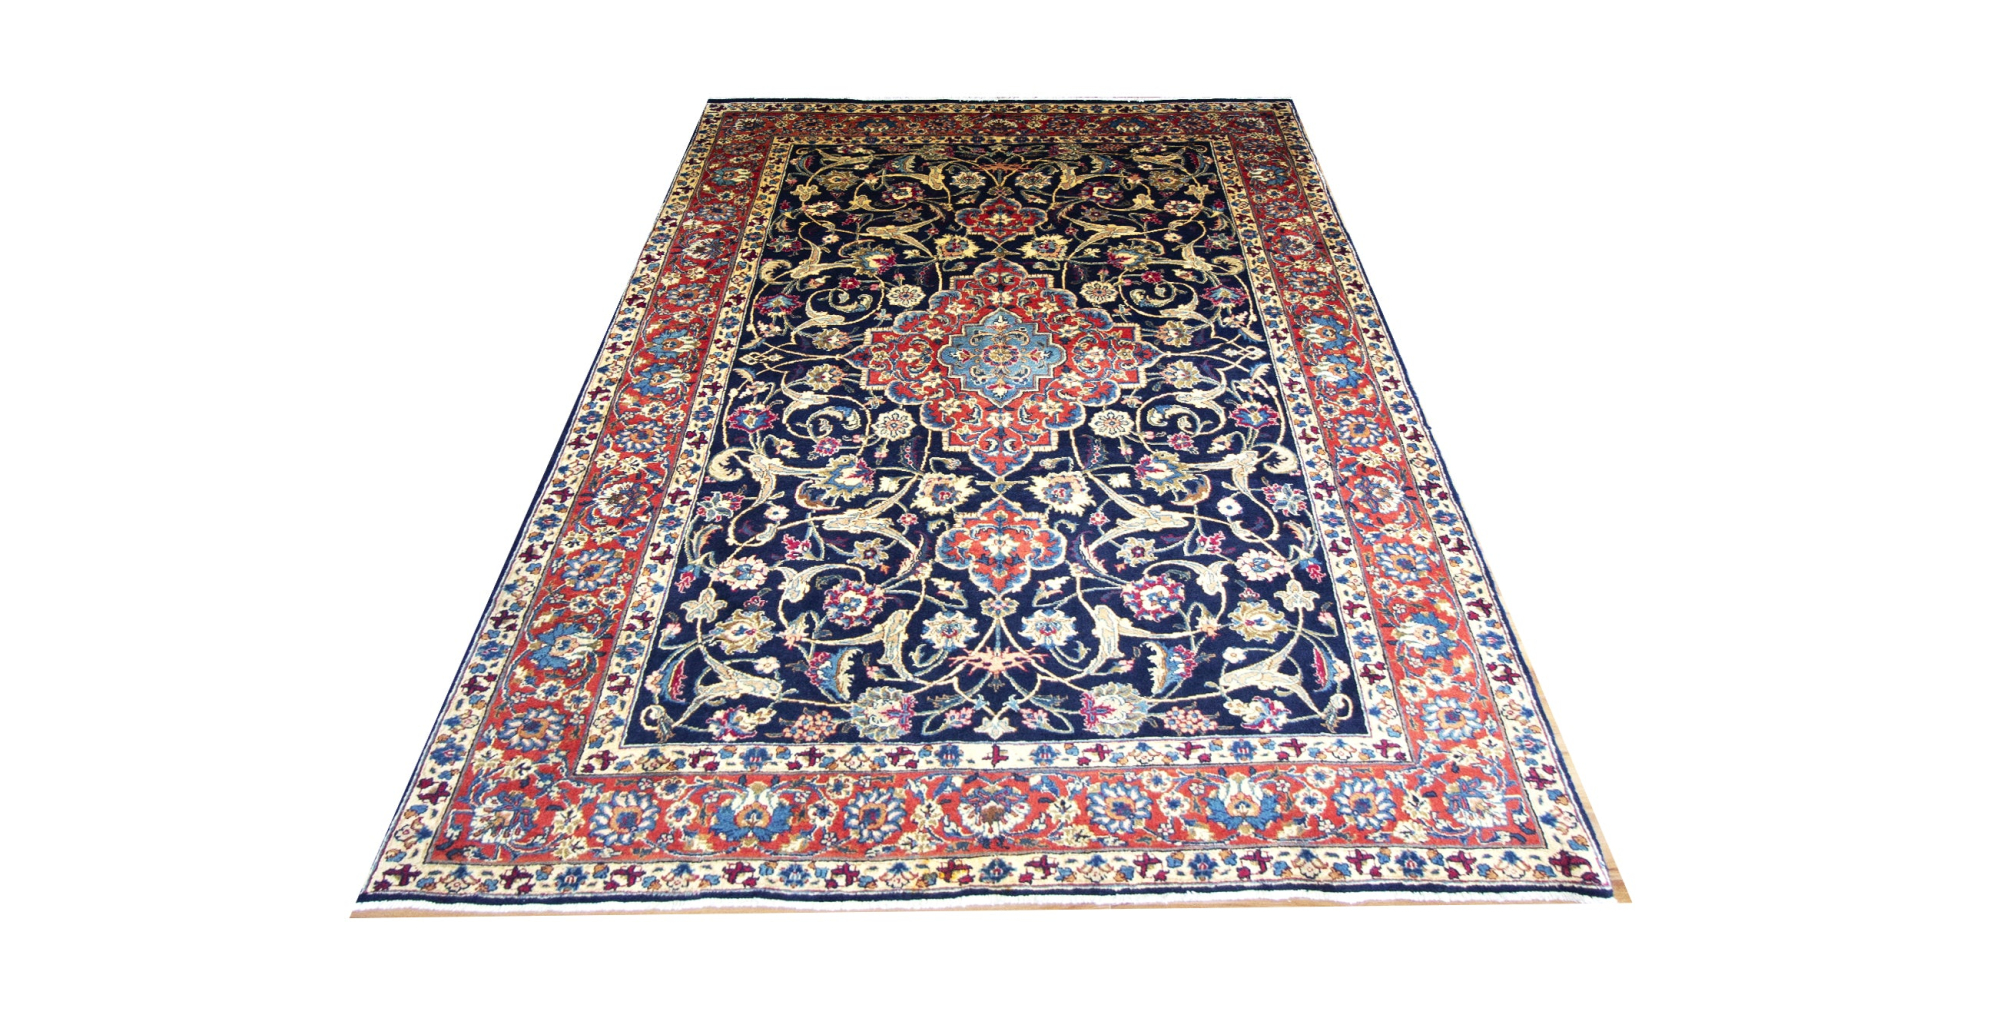 Area rug for living space and any room. Floor decor, rugs and carpets from Tabrizi Rugs. Mahalat 460 - 6'4